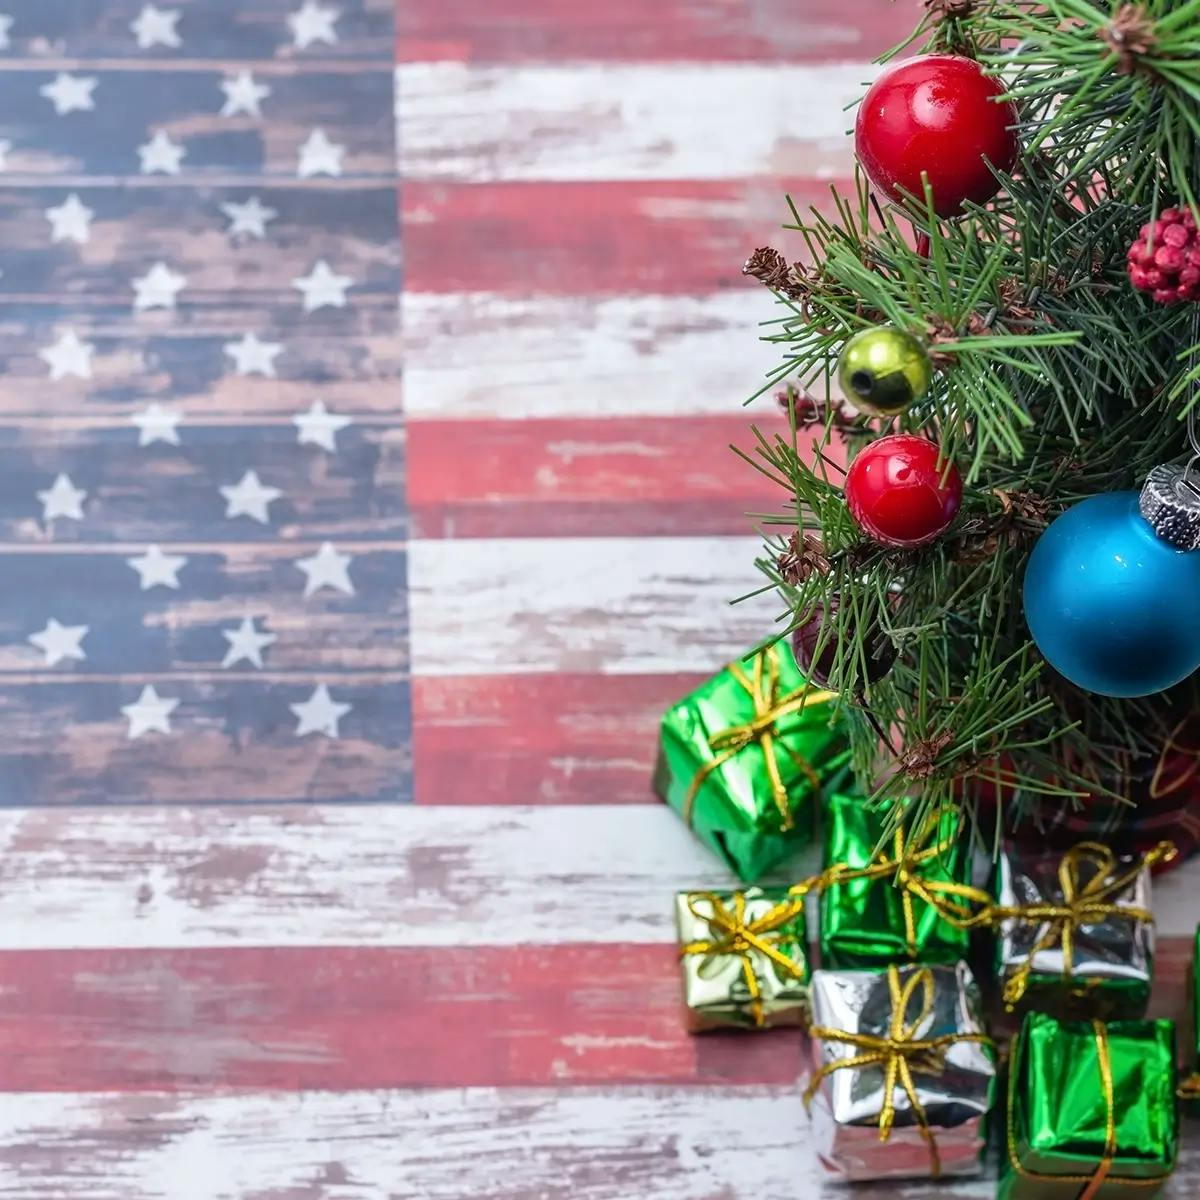 A US flag painted on wood, with a small Christmas tree and presents on top.